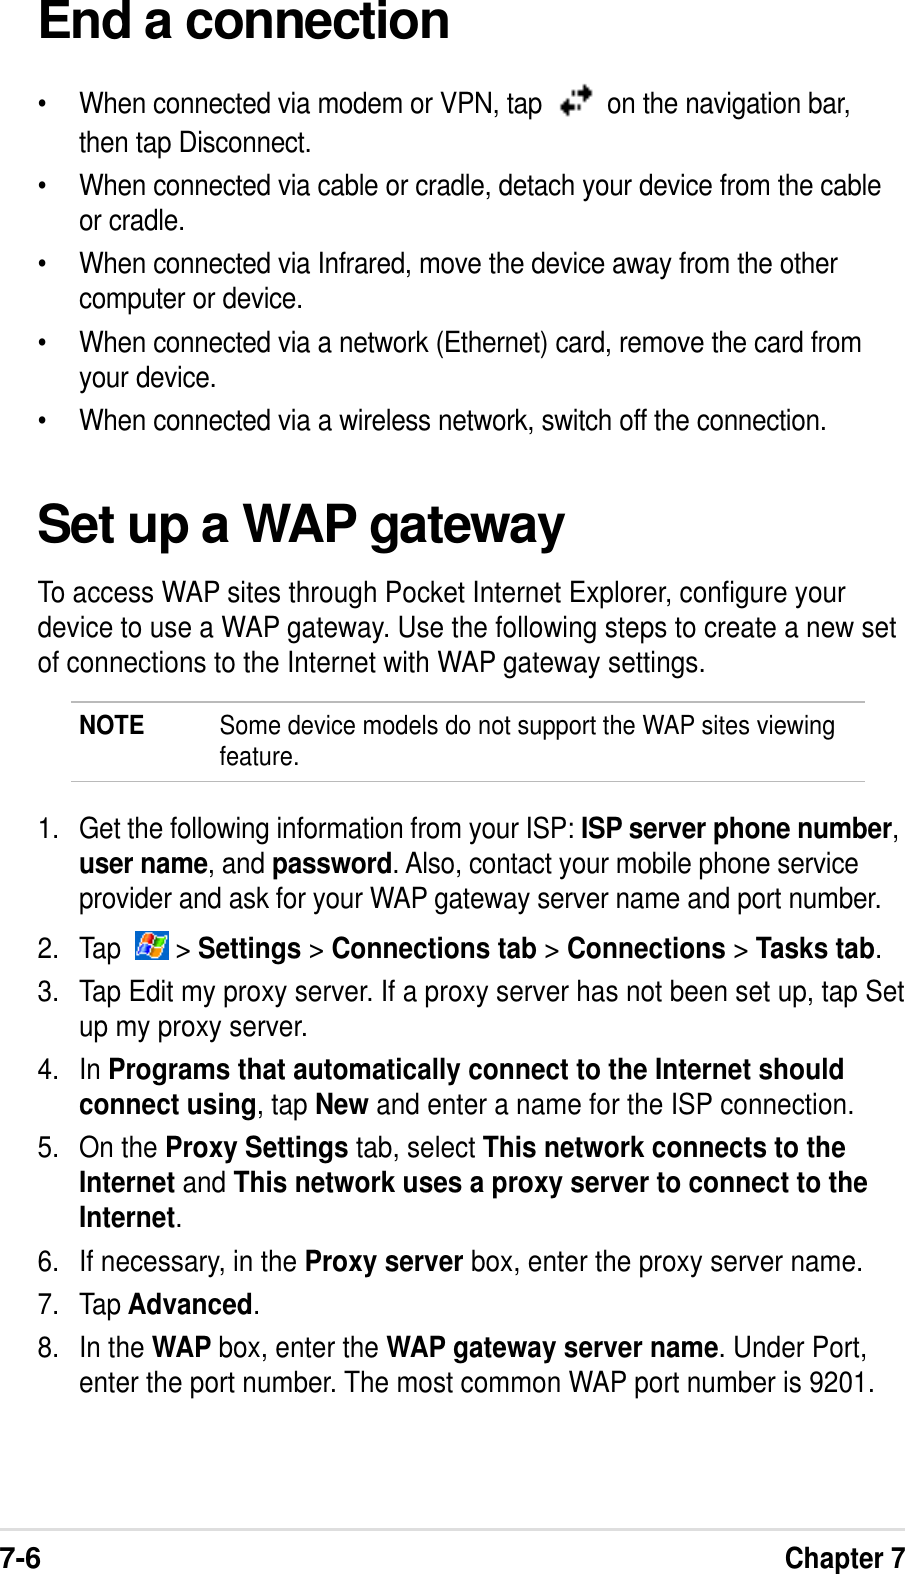 7-6Chapter 7End a connection• When connected via modem or VPN, tap  on the navigation bar,then tap Disconnect.• When connected via cable or cradle, detach your device from the cableor cradle.• When connected via Infrared, move the device away from the othercomputer or device.• When connected via a network (Ethernet) card, remove the card fromyour device.• When connected via a wireless network, switch off the connection.Set up a WAP gatewayTo access WAP sites through Pocket Internet Explorer, configure yourdevice to use a WAP gateway. Use the following steps to create a new setof connections to the Internet with WAP gateway settings.NOTE Some device models do not support the WAP sites viewingfeature.1. Get the following information from your ISP: ISP server phone number,user name, and password. Also, contact your mobile phone serviceprovider and ask for your WAP gateway server name and port number.2. Tap    &gt; Settings &gt;Connections tab &gt; Connections &gt; Tasks tab.3. Tap Edit my proxy server. If a proxy server has not been set up, tap Setup my proxy server.4. In Programs that automatically connect to the Internet shouldconnect using, tap New and enter a name for the ISP connection.5. On the Proxy Settings tab, select This network connects to theInternet and This network uses a proxy server to connect to theInternet.6. If necessary, in the Proxy server box, enter the proxy server name.7. Tap Advanced.8. In the WAP box, enter the WAP gateway server name. Under Port,enter the port number. The most common WAP port number is 9201.